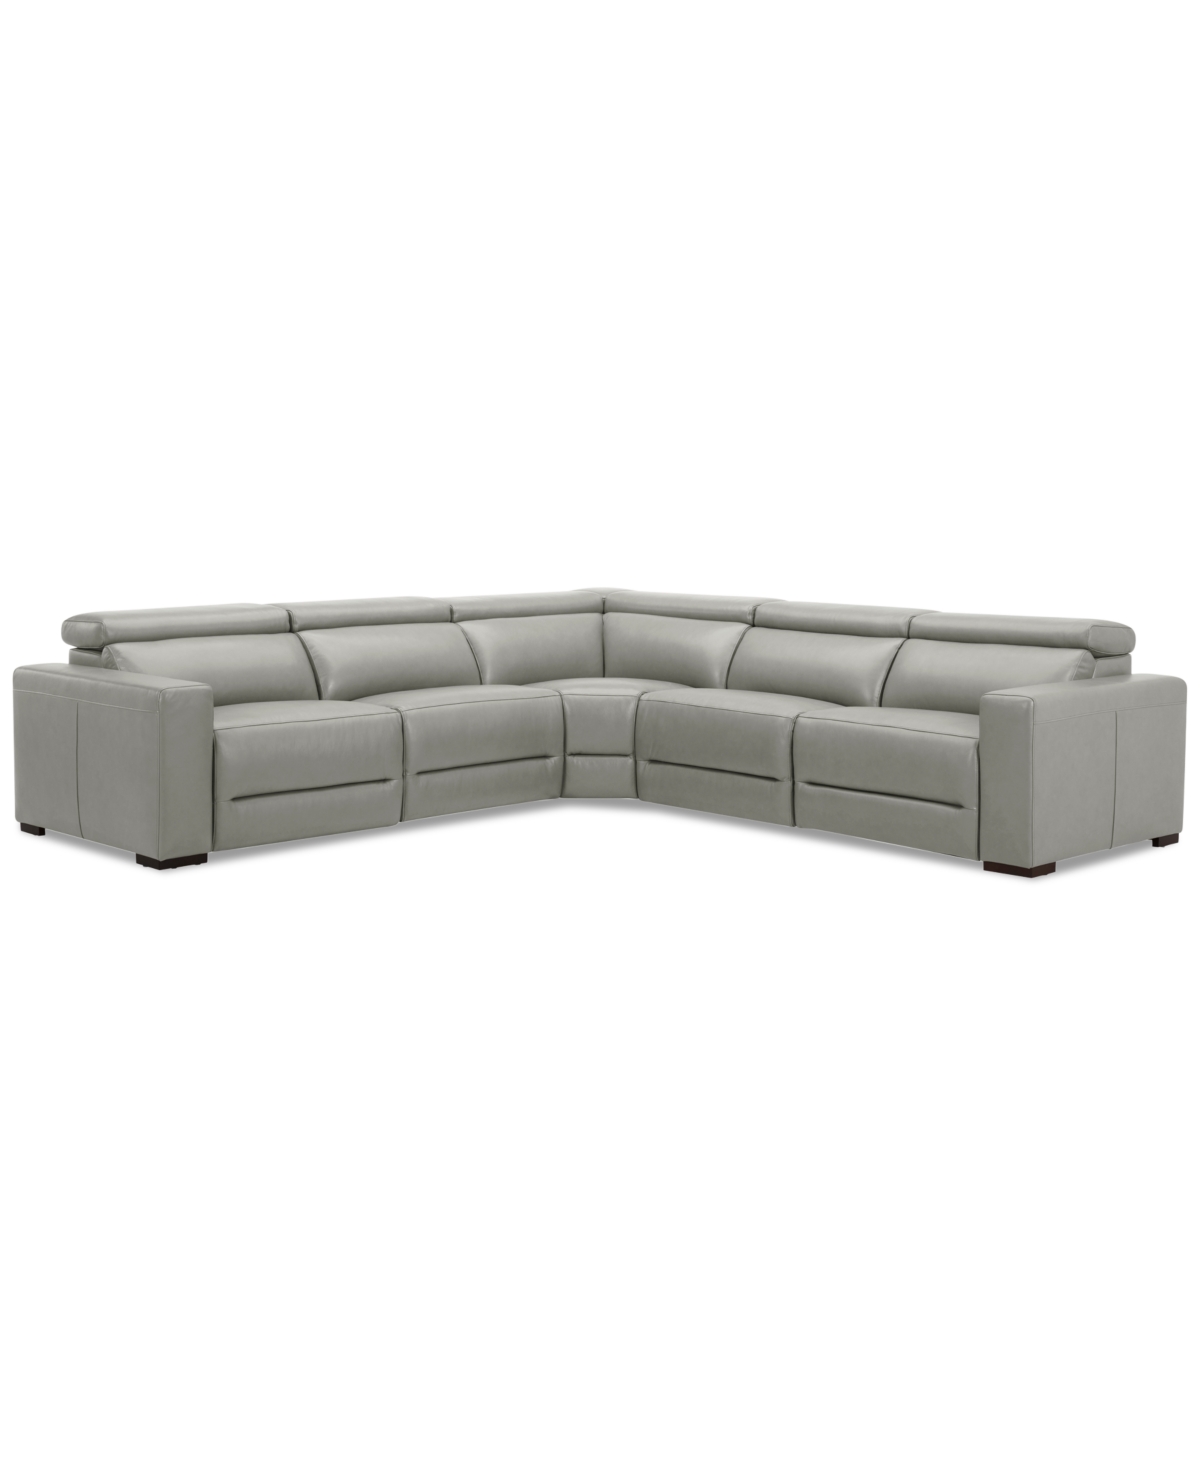 Macy's Nevio 124" 5-pc. Leather Sectional With 3 Power Recliners And Headrests, Created For  In Light Grey